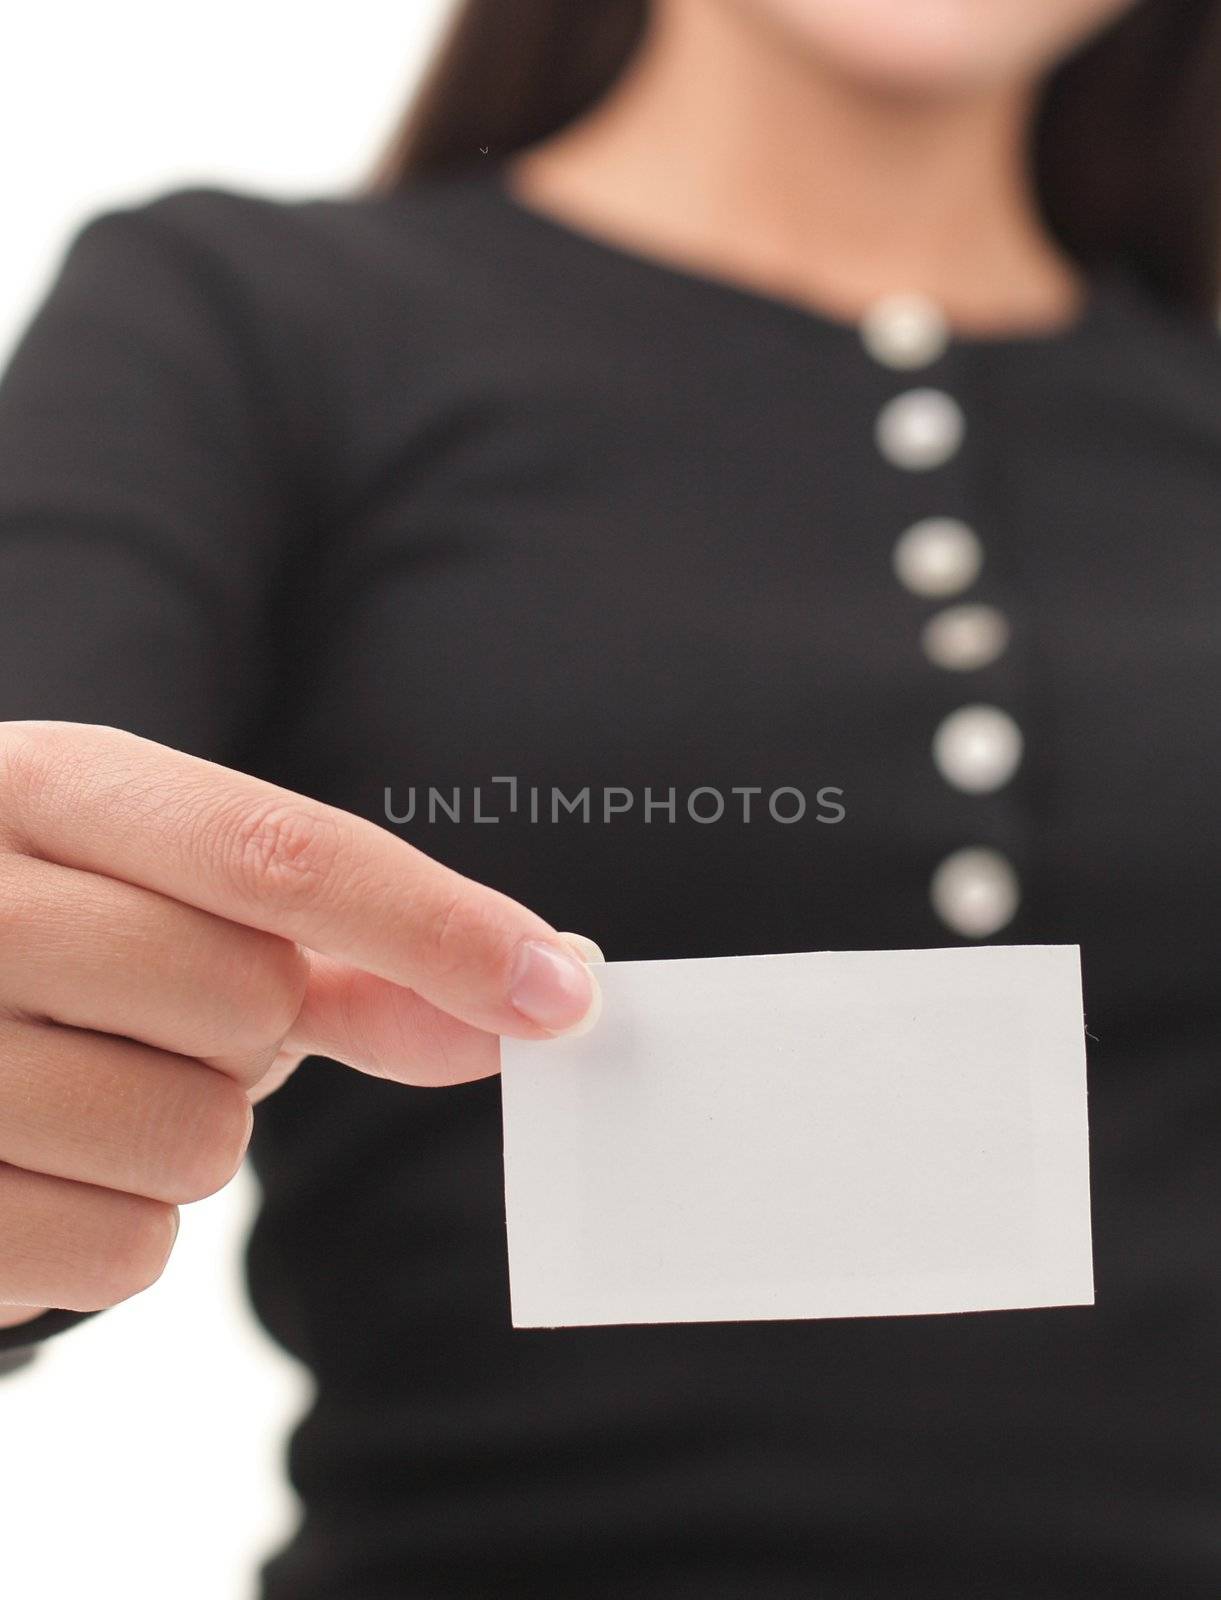 Business card or blank white paper sign. Shallow depth of field, focus on card. 